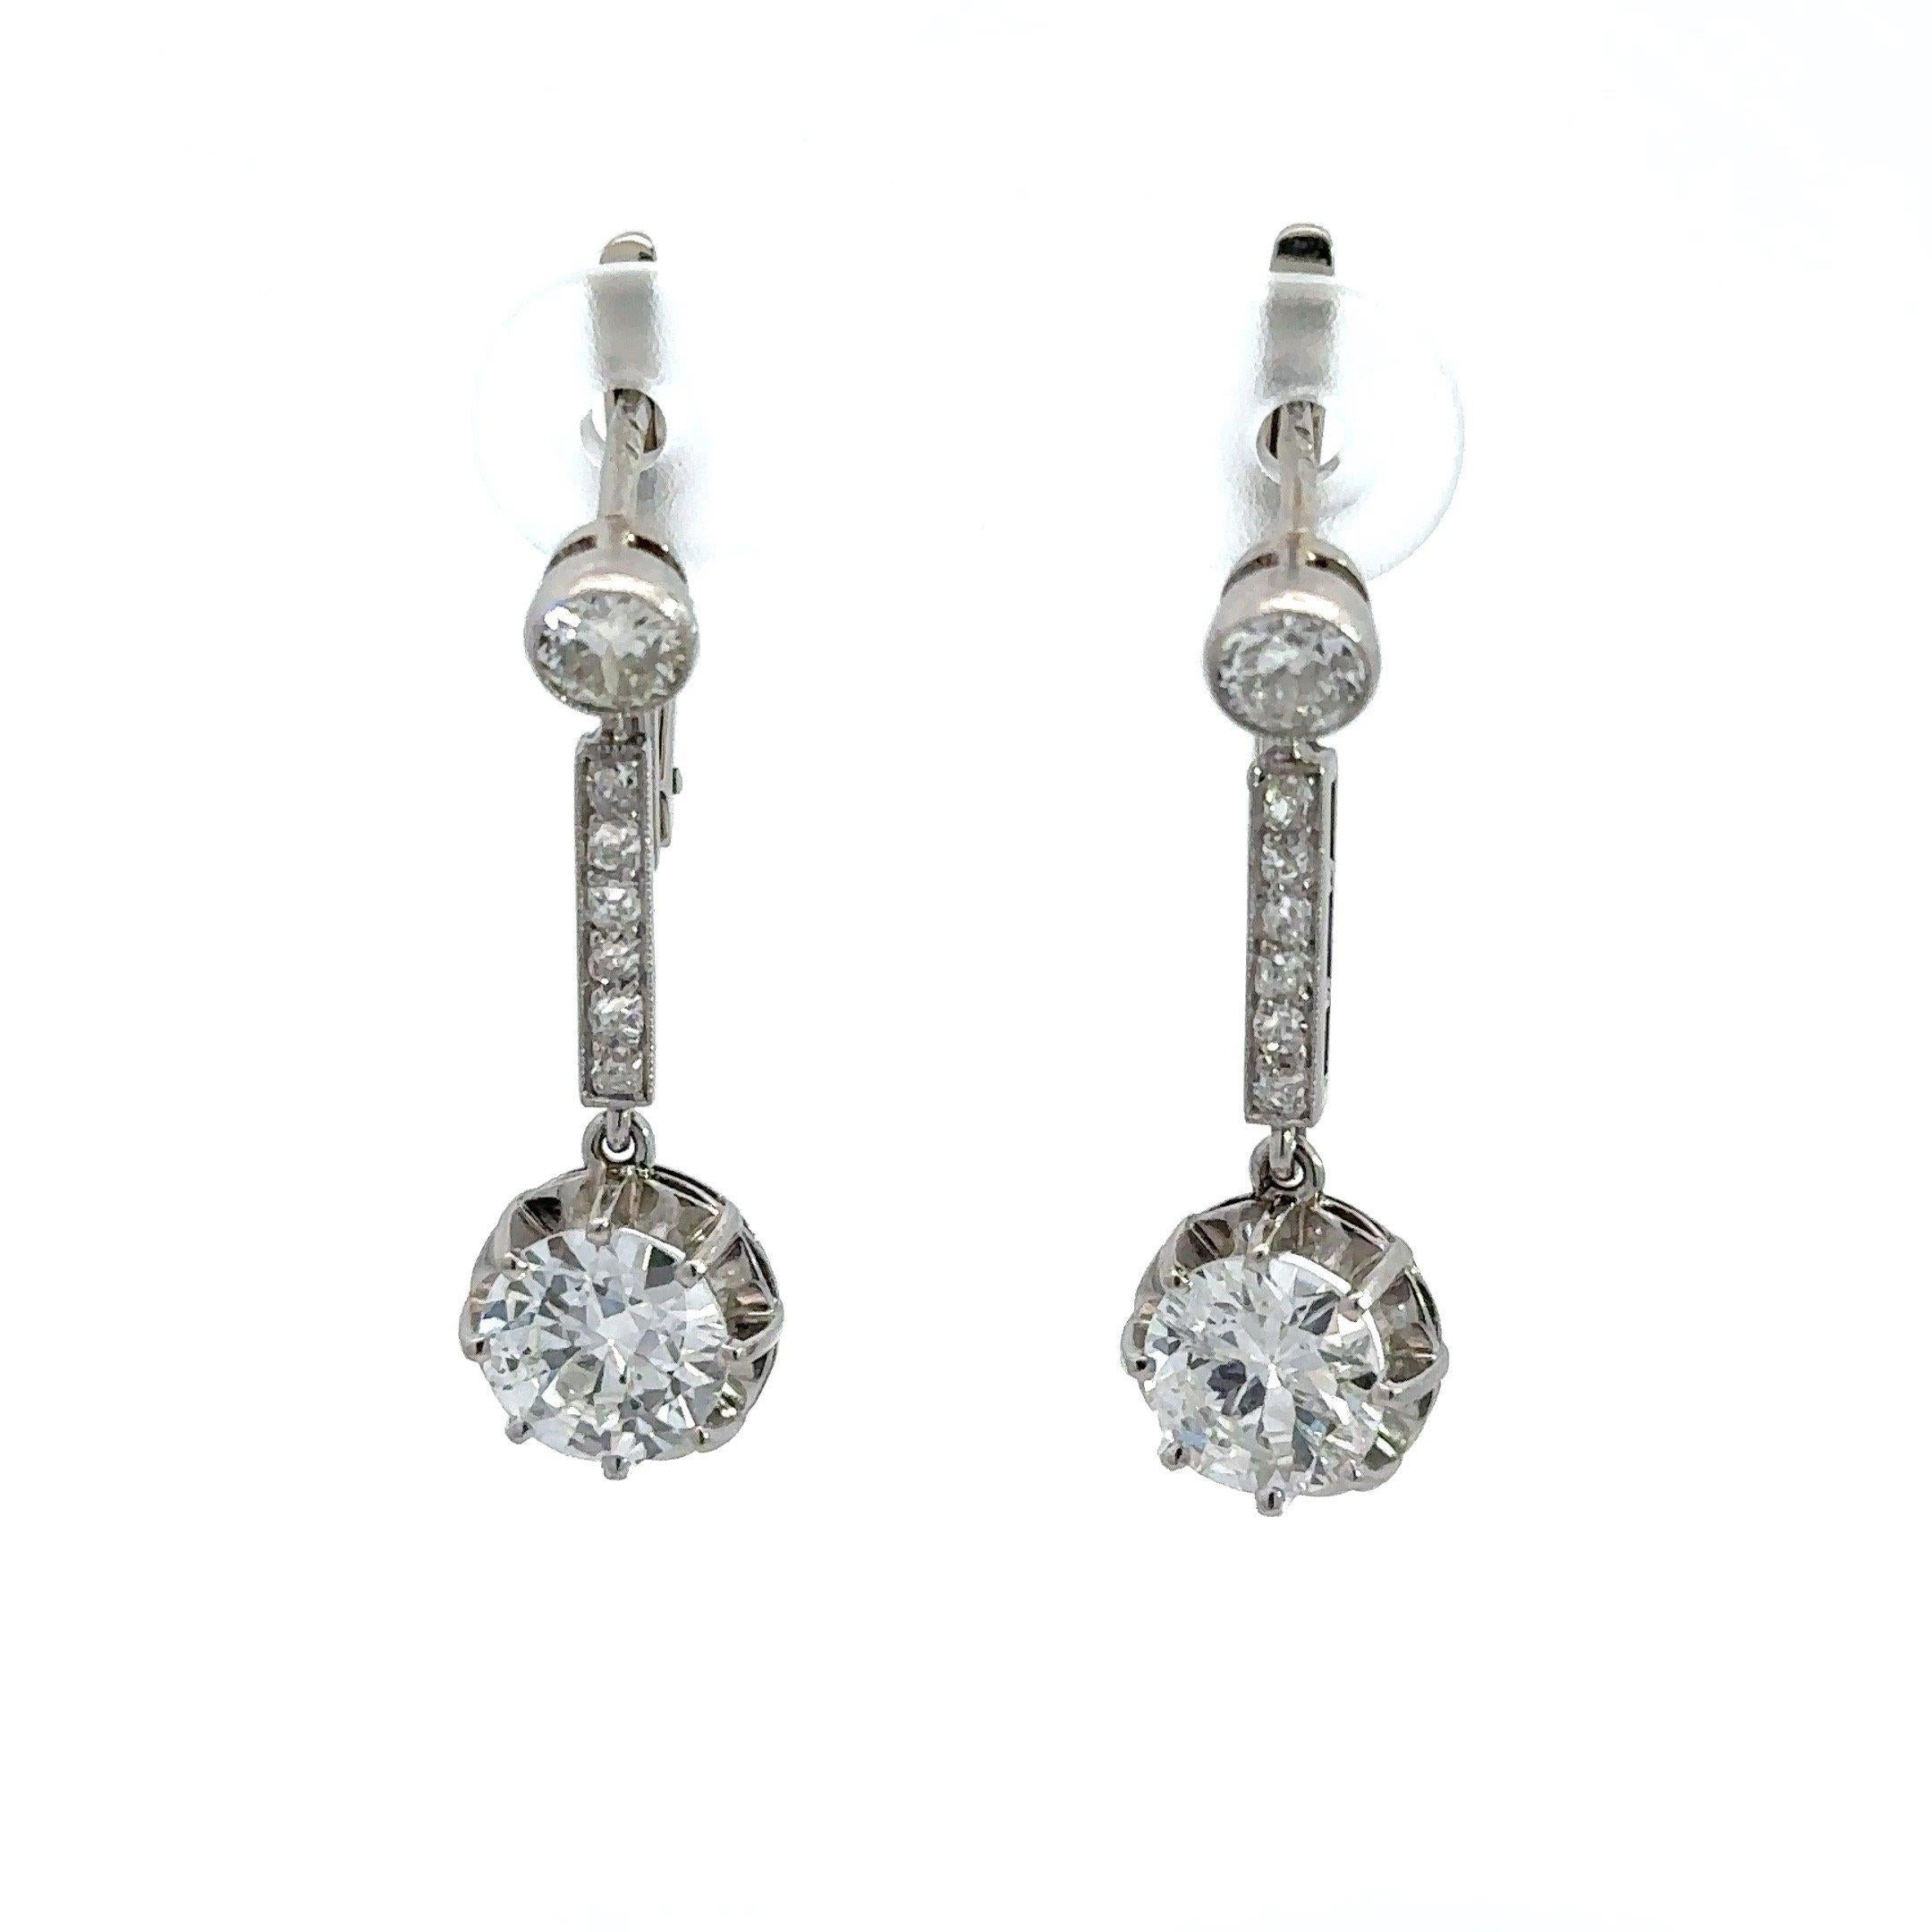 These antique 2.4CT diamond platinum Art Deco earrings were crafted in France c. 1925. The earrings feature two old European-cut diamonds, approximately  1.72CT, with fourteen old European-cut accent diamonds, approximately .68CT. The diamonds are